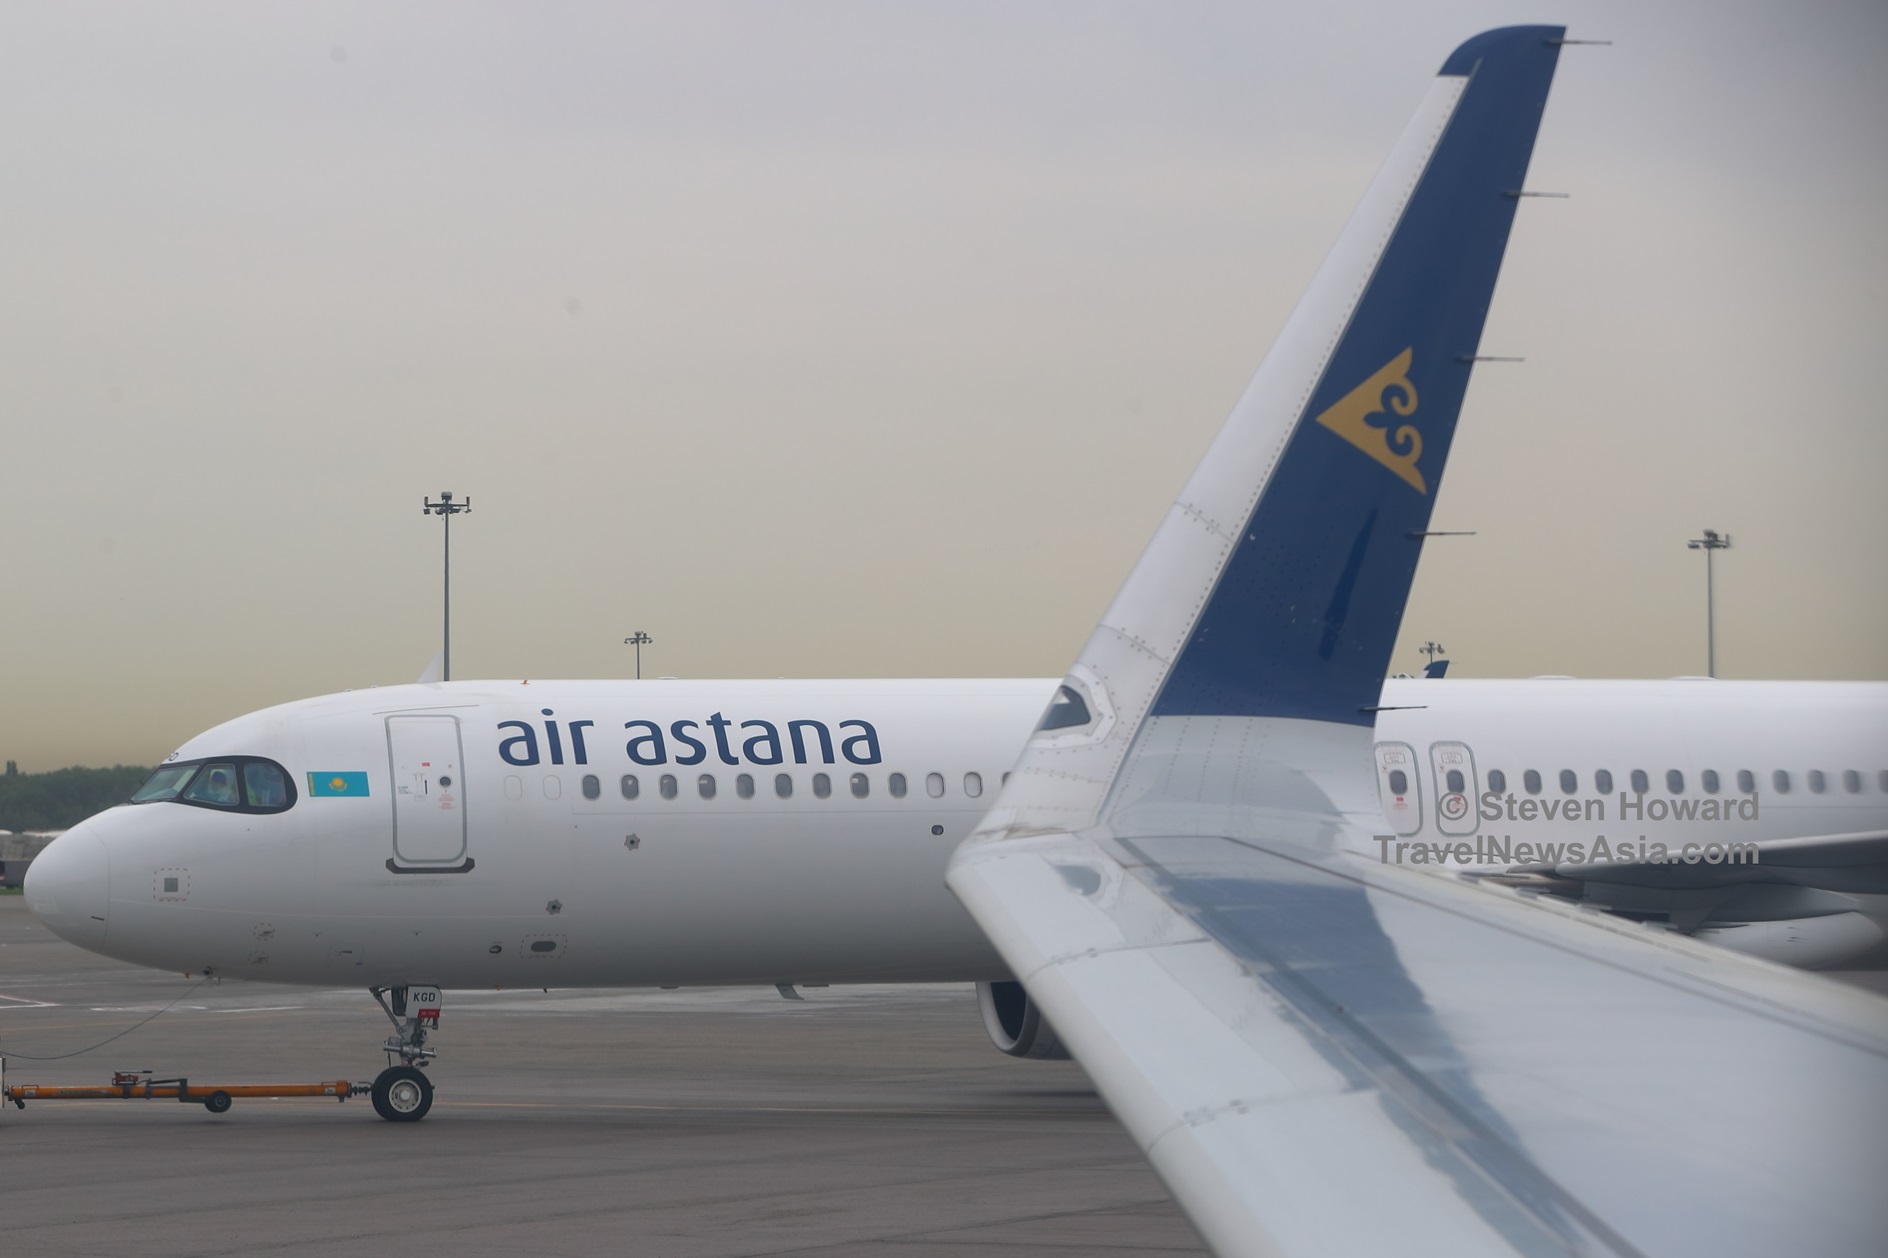 Air Astana aircraft at ALA, Kazakhstan. Picture by Steven Howard of TravelNewsAsia.com Click to enlarge.